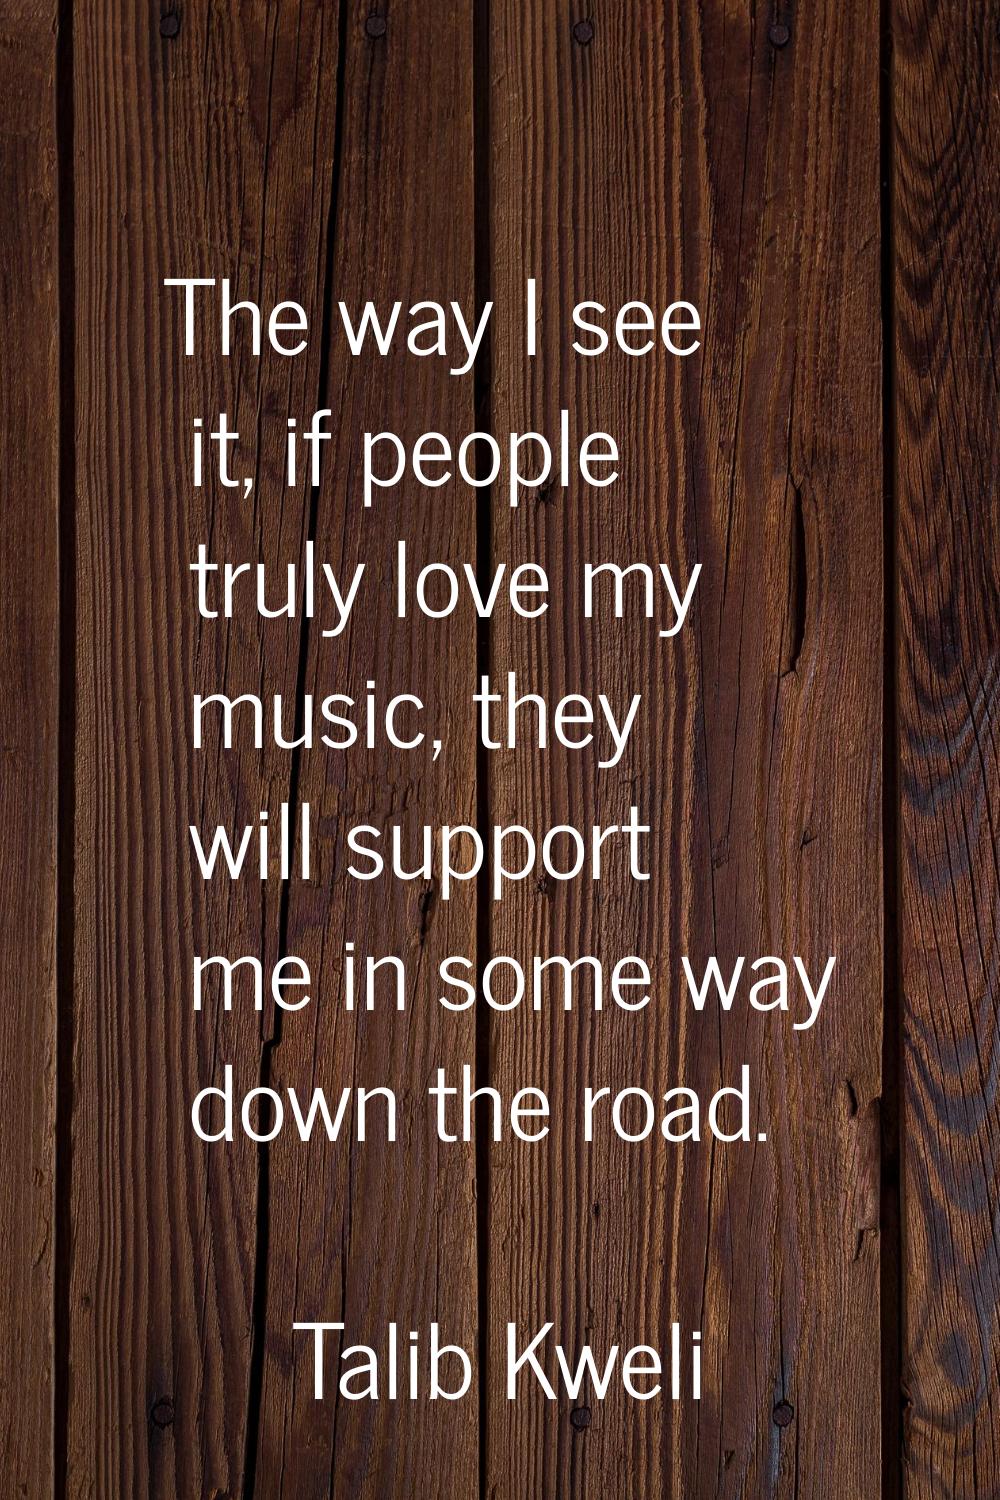 The way I see it, if people truly love my music, they will support me in some way down the road.